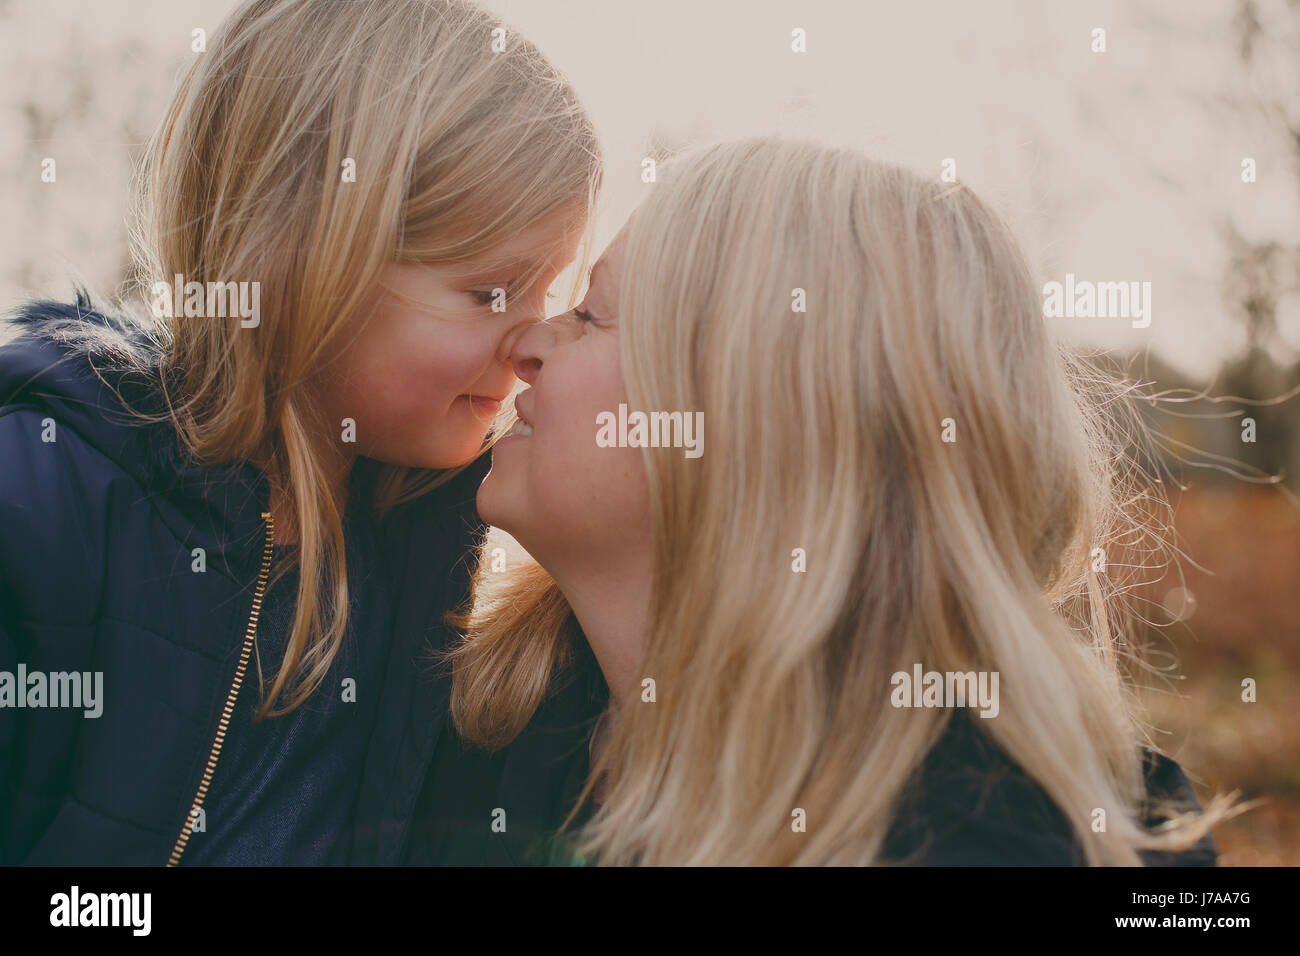 Mother and daughter touching noses Stock Photo